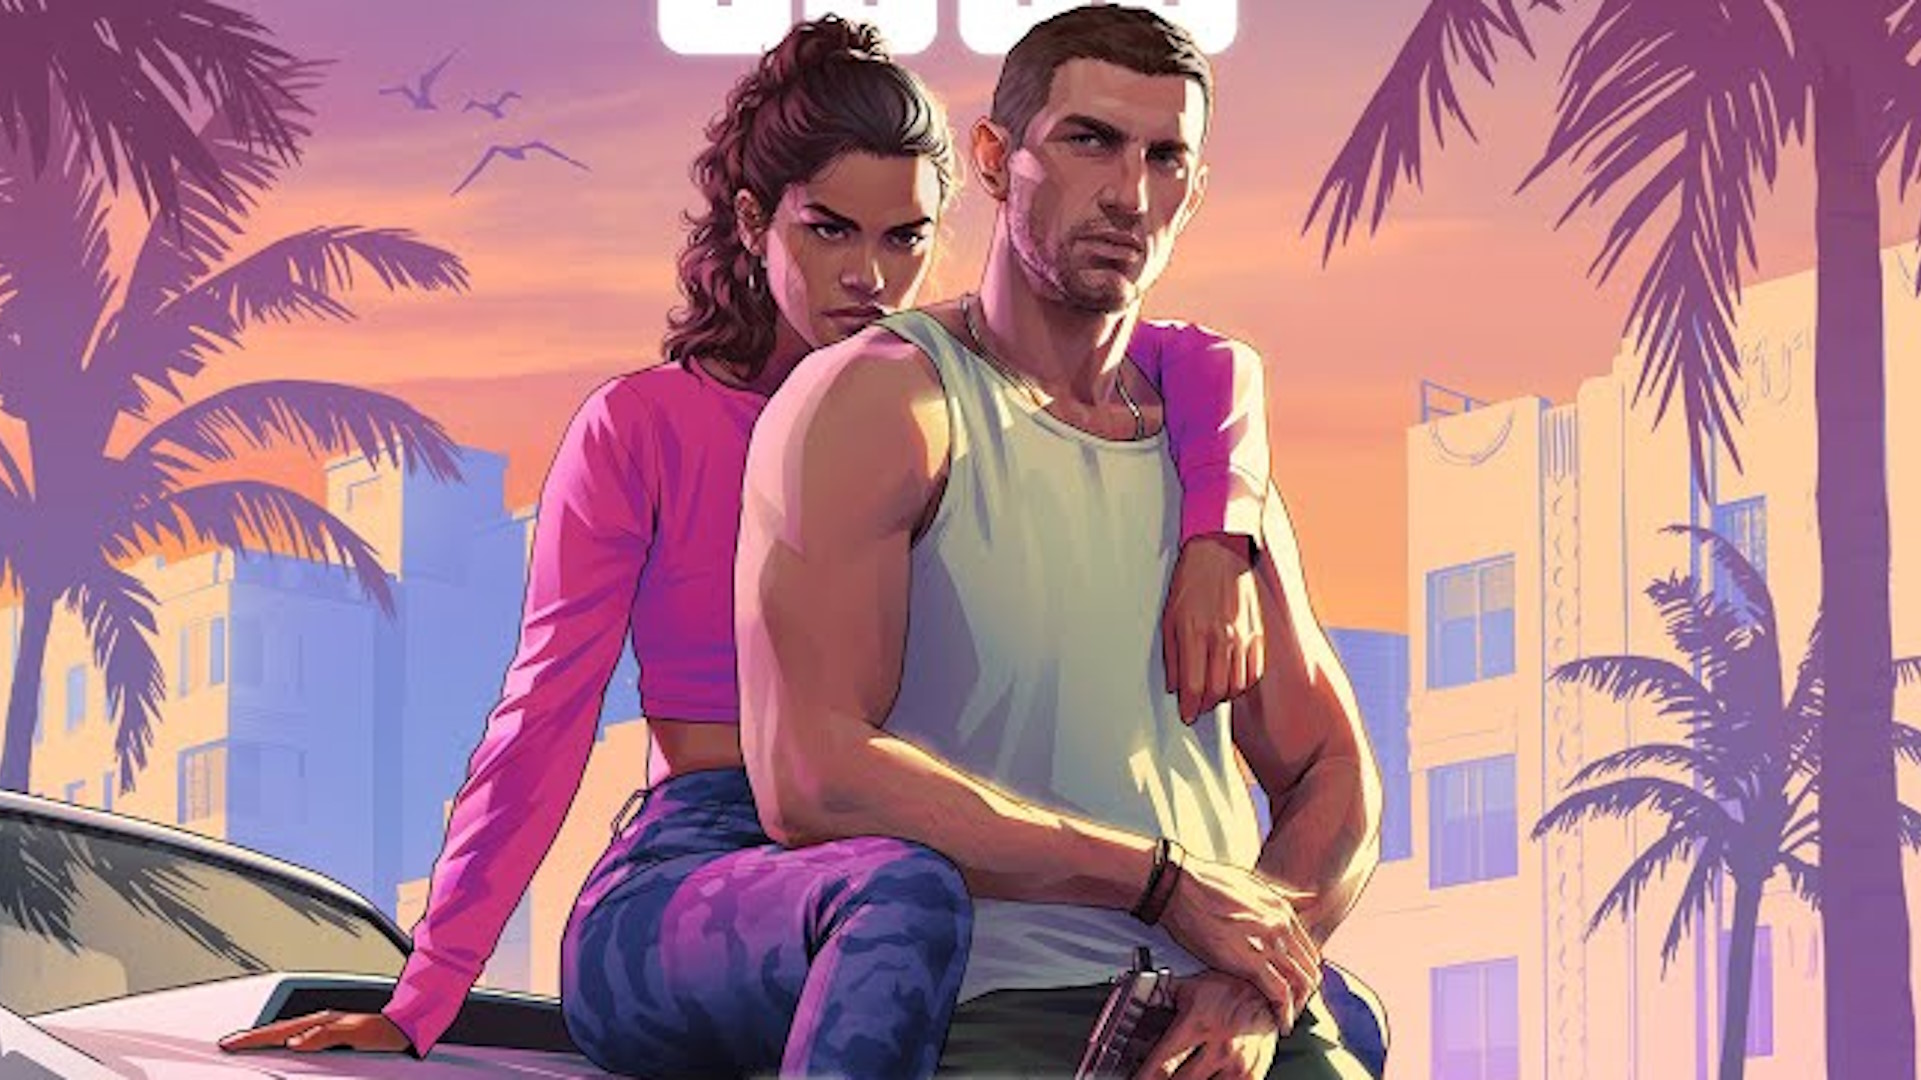  Grand Theft Auto publisher Take-Two Interactive is laying off 5% of its workforce and 'rationalizing its pipeline,' the latest skin-crawling corporate euphemism for people losing their jobs 